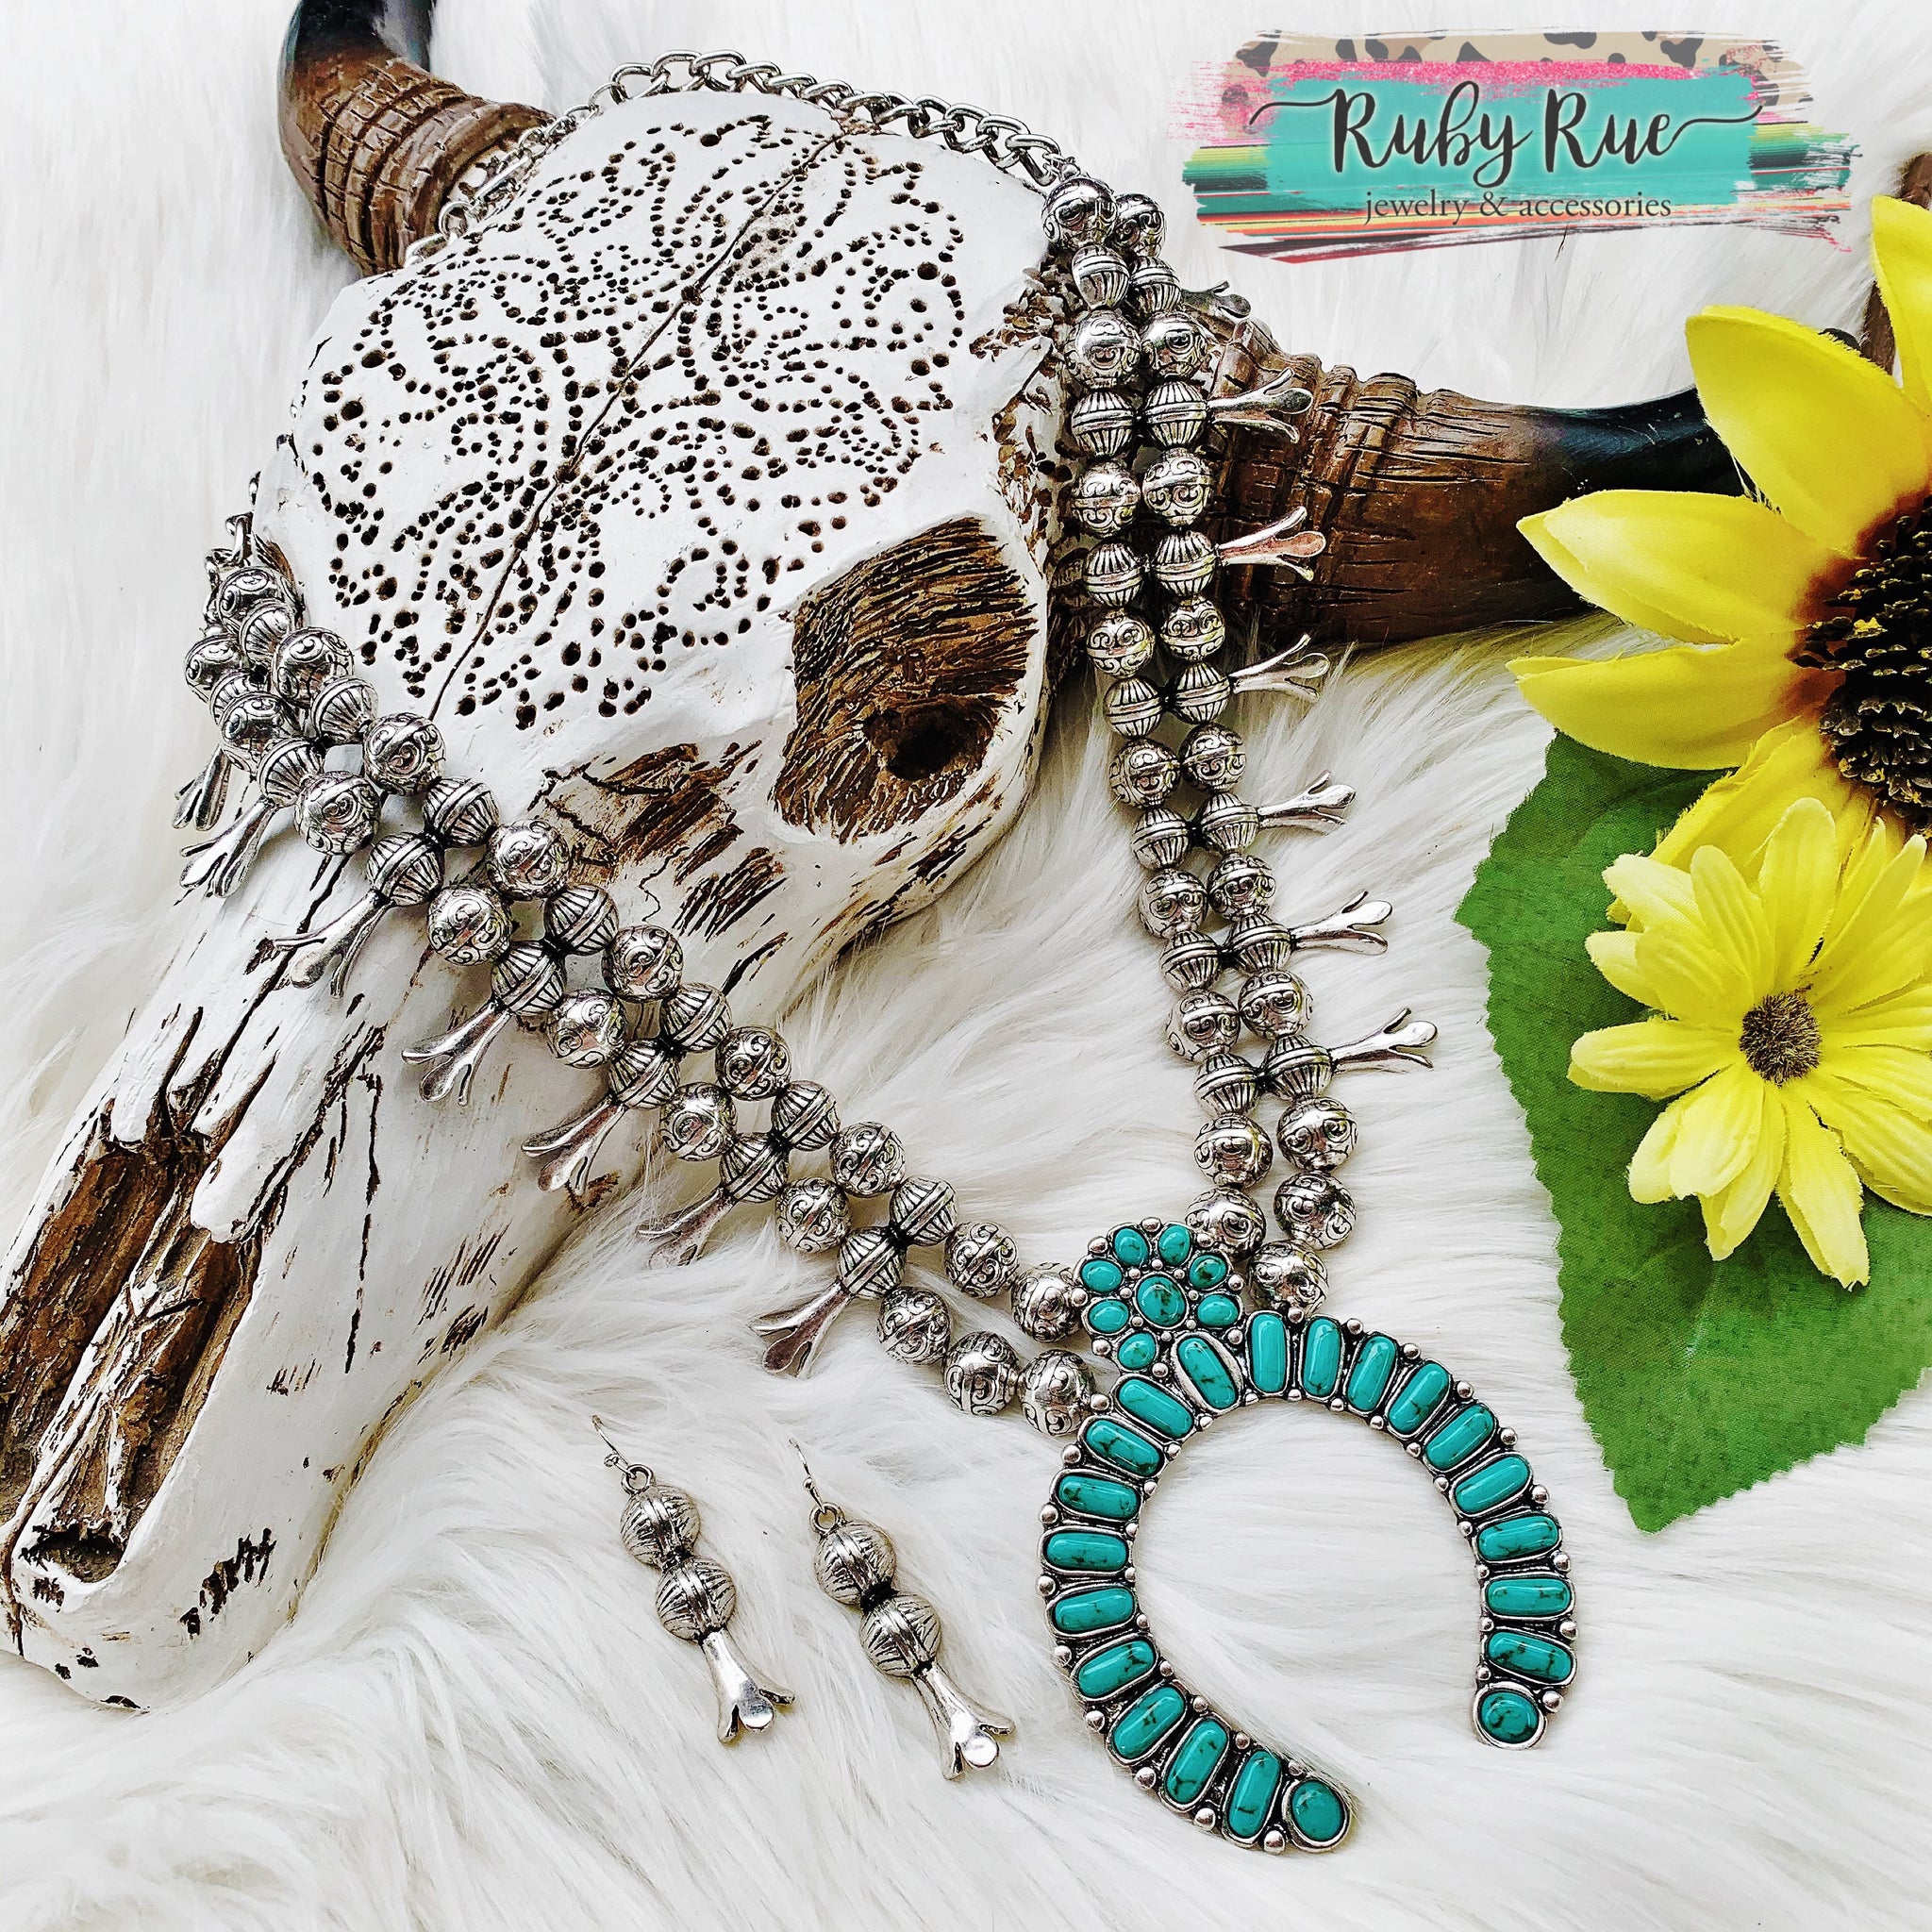 The Nikki Turquoise Squash Set - Ruby Rue Jewelry & Accessories